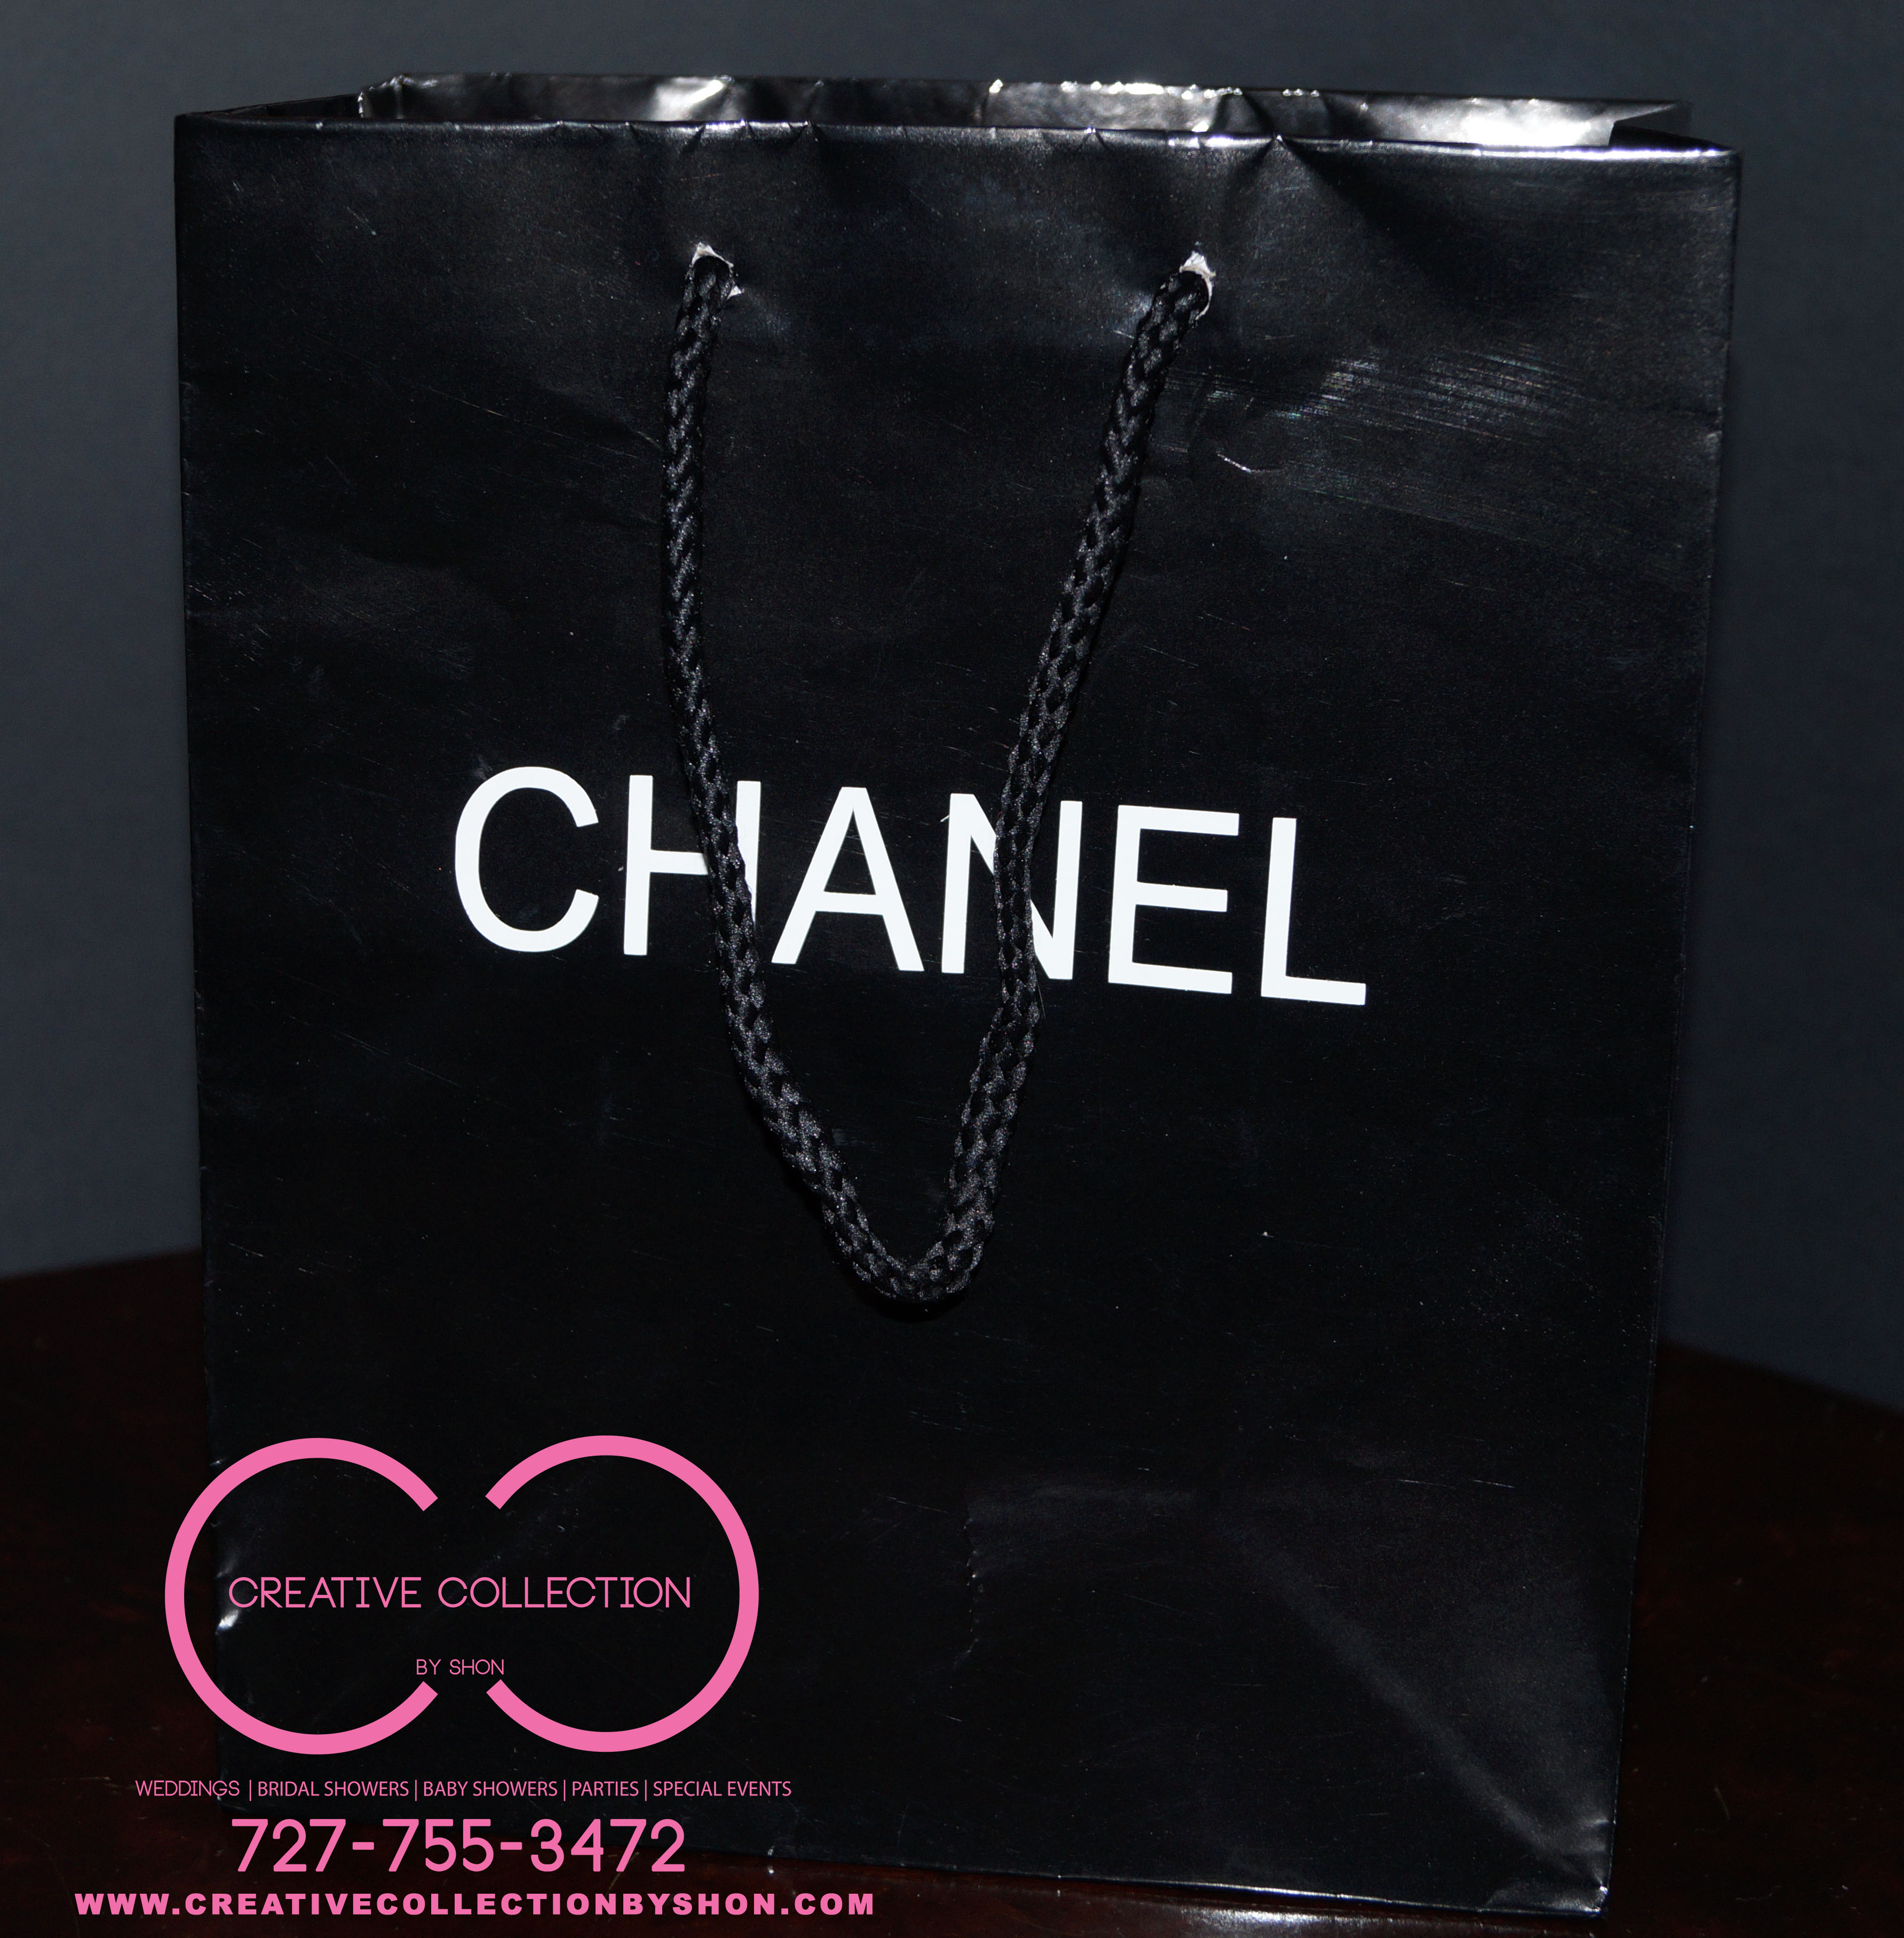 chanel supermarket bags